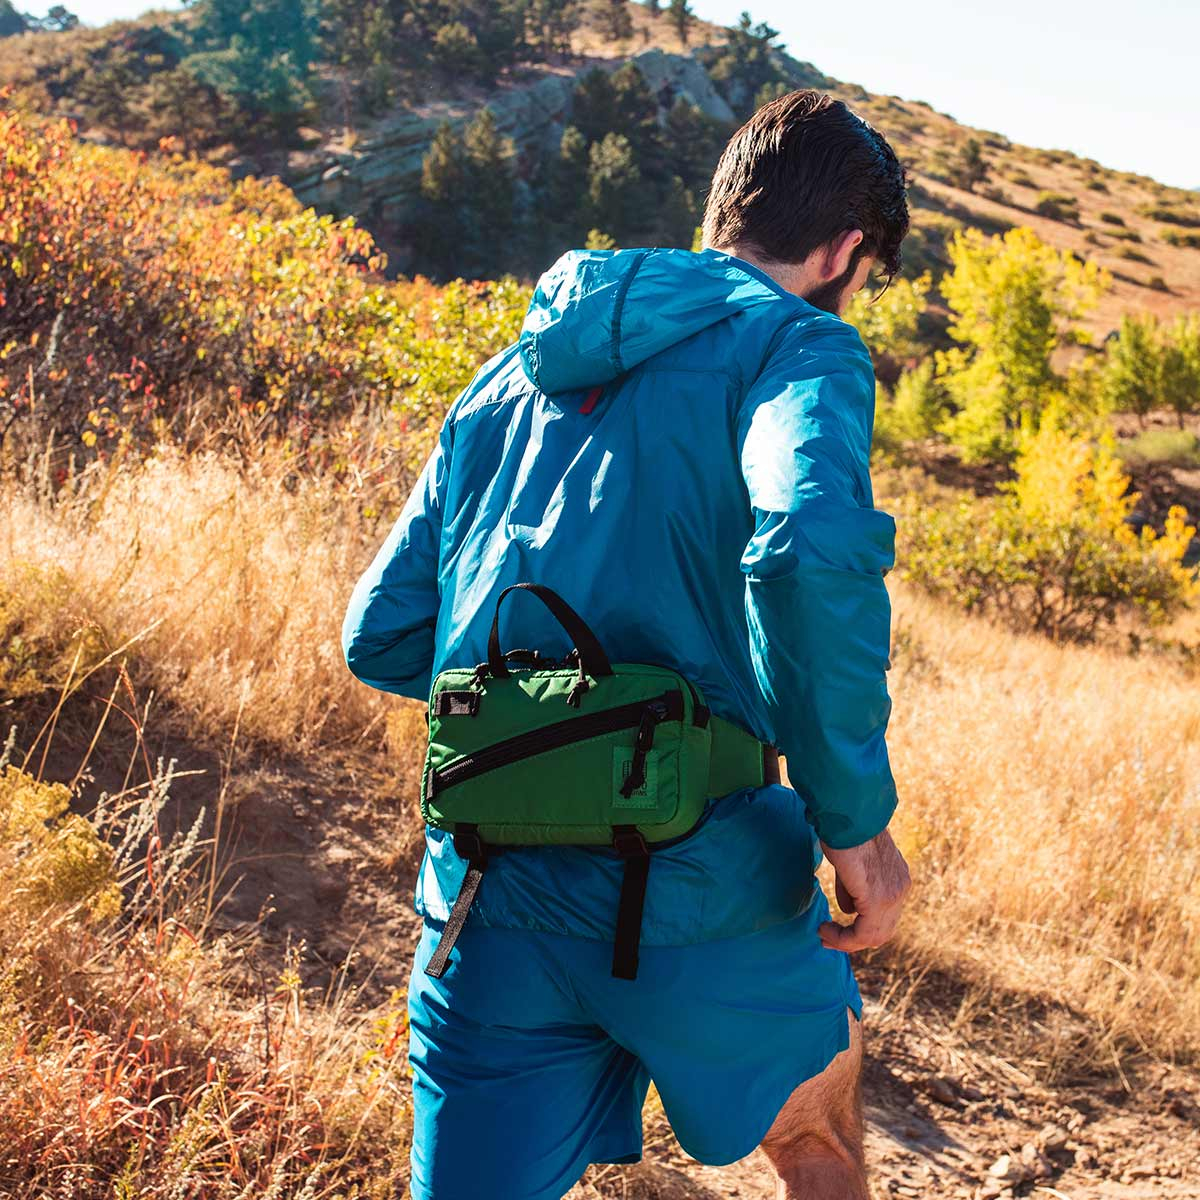 Topo Designs Mini Quick Pack Green, a well-built, secure bag for travel